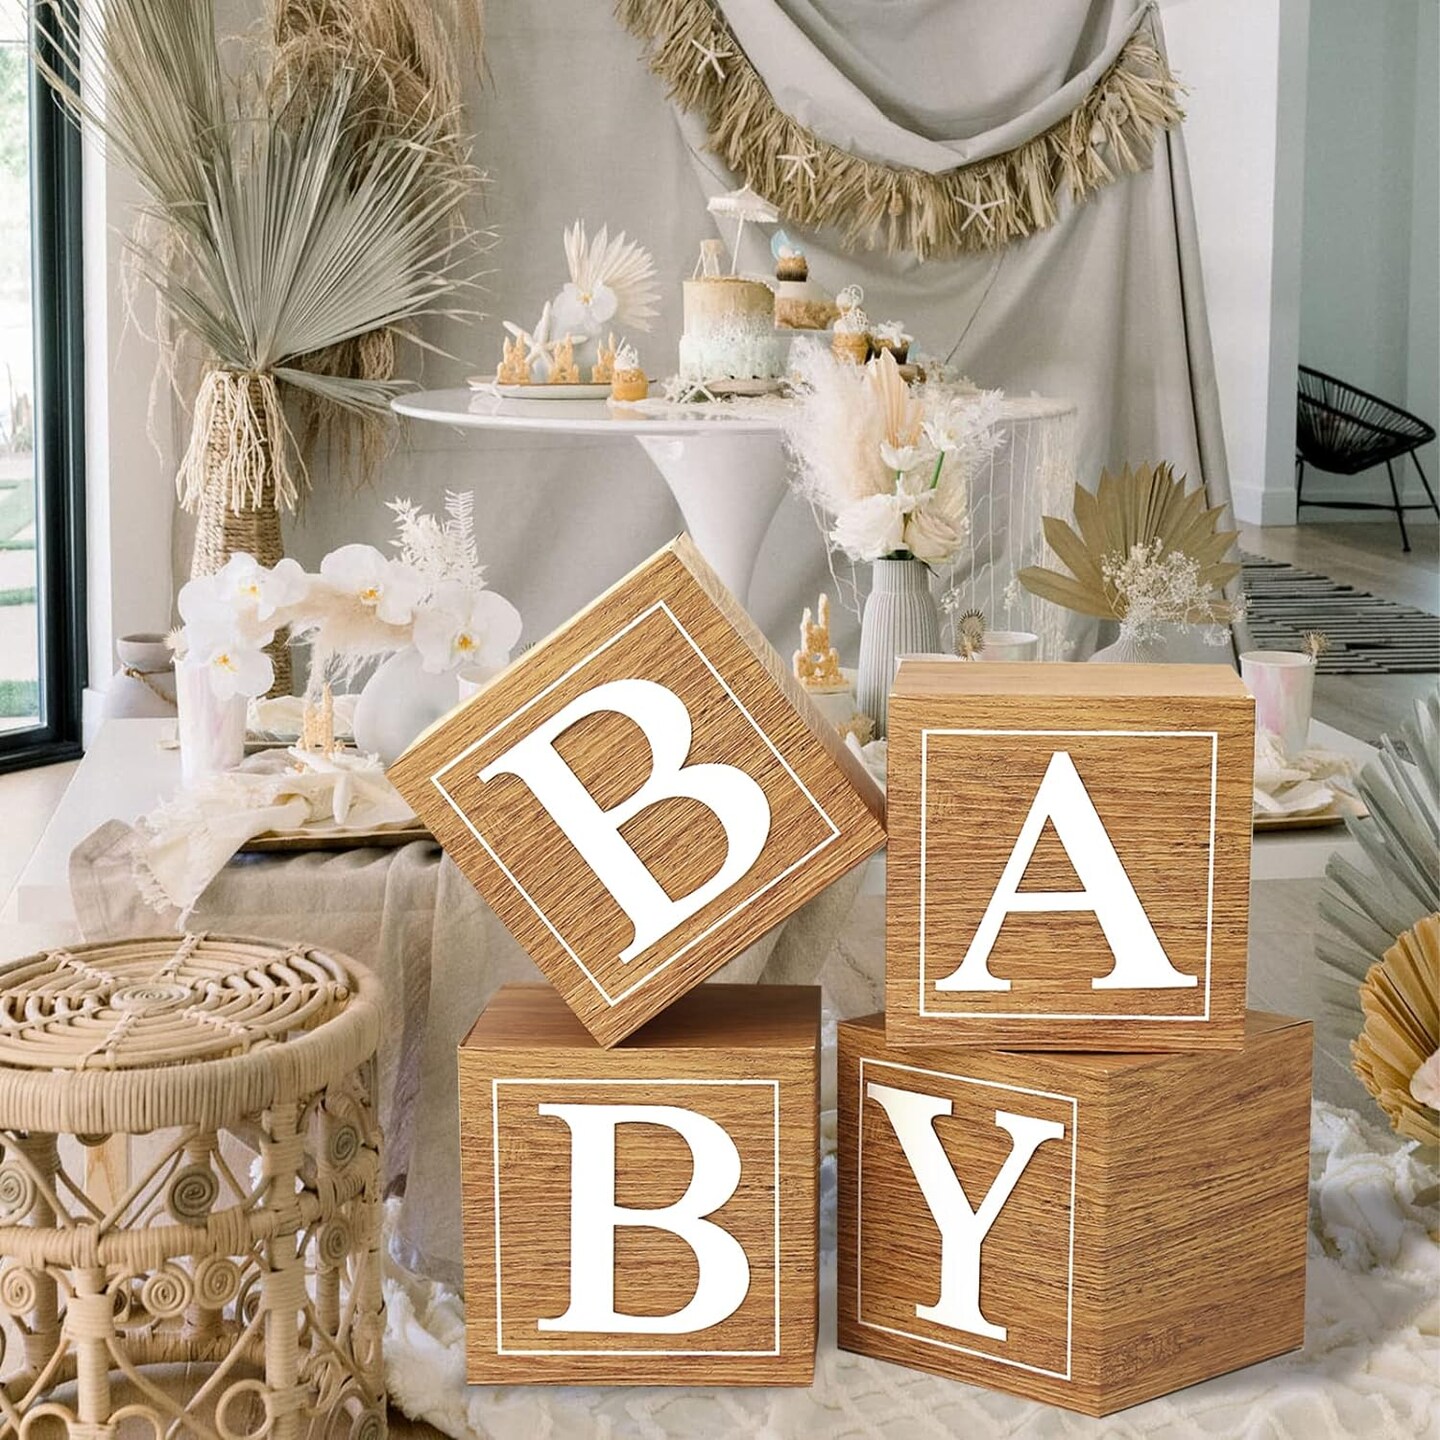 Baby Shower Boxes Birthday Party Decorations - 4 Wood Grain Brown Stereoscopic Blocks with BABY Letter,1st Birthday Balloon Boxes,Teddy Bear Boys Girls Baby Shower Supplies, Gender Reveal Backdrop